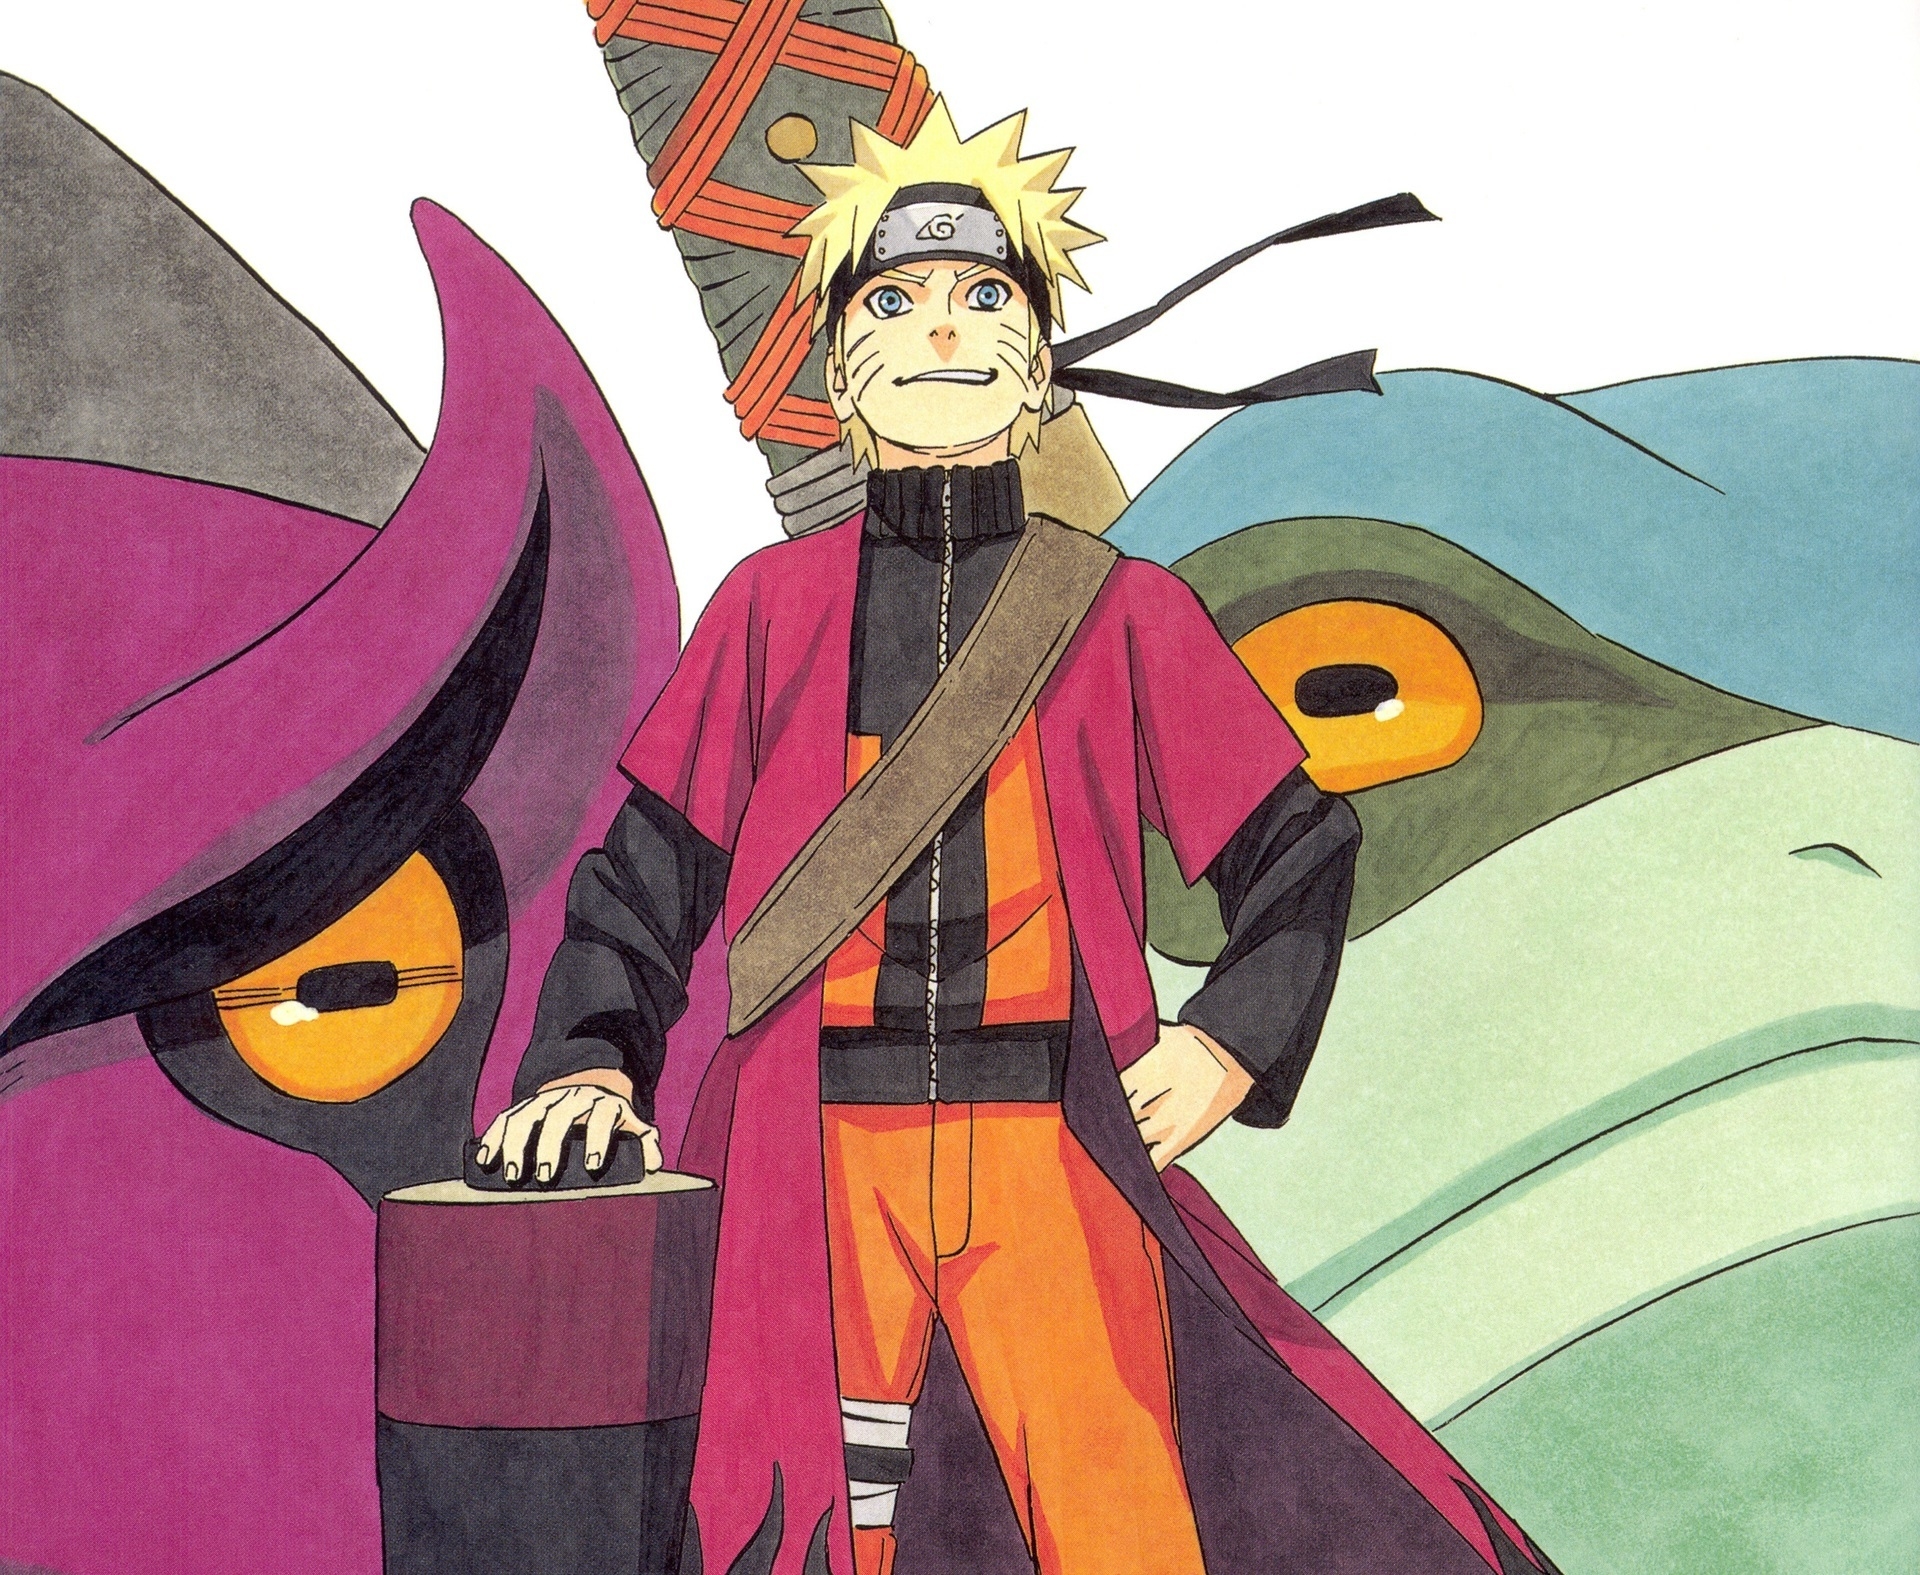 Naruto Uzumaki Artwork Wallpaper HD Anime 4K Wallpapers Images and Background Wallpapers Den